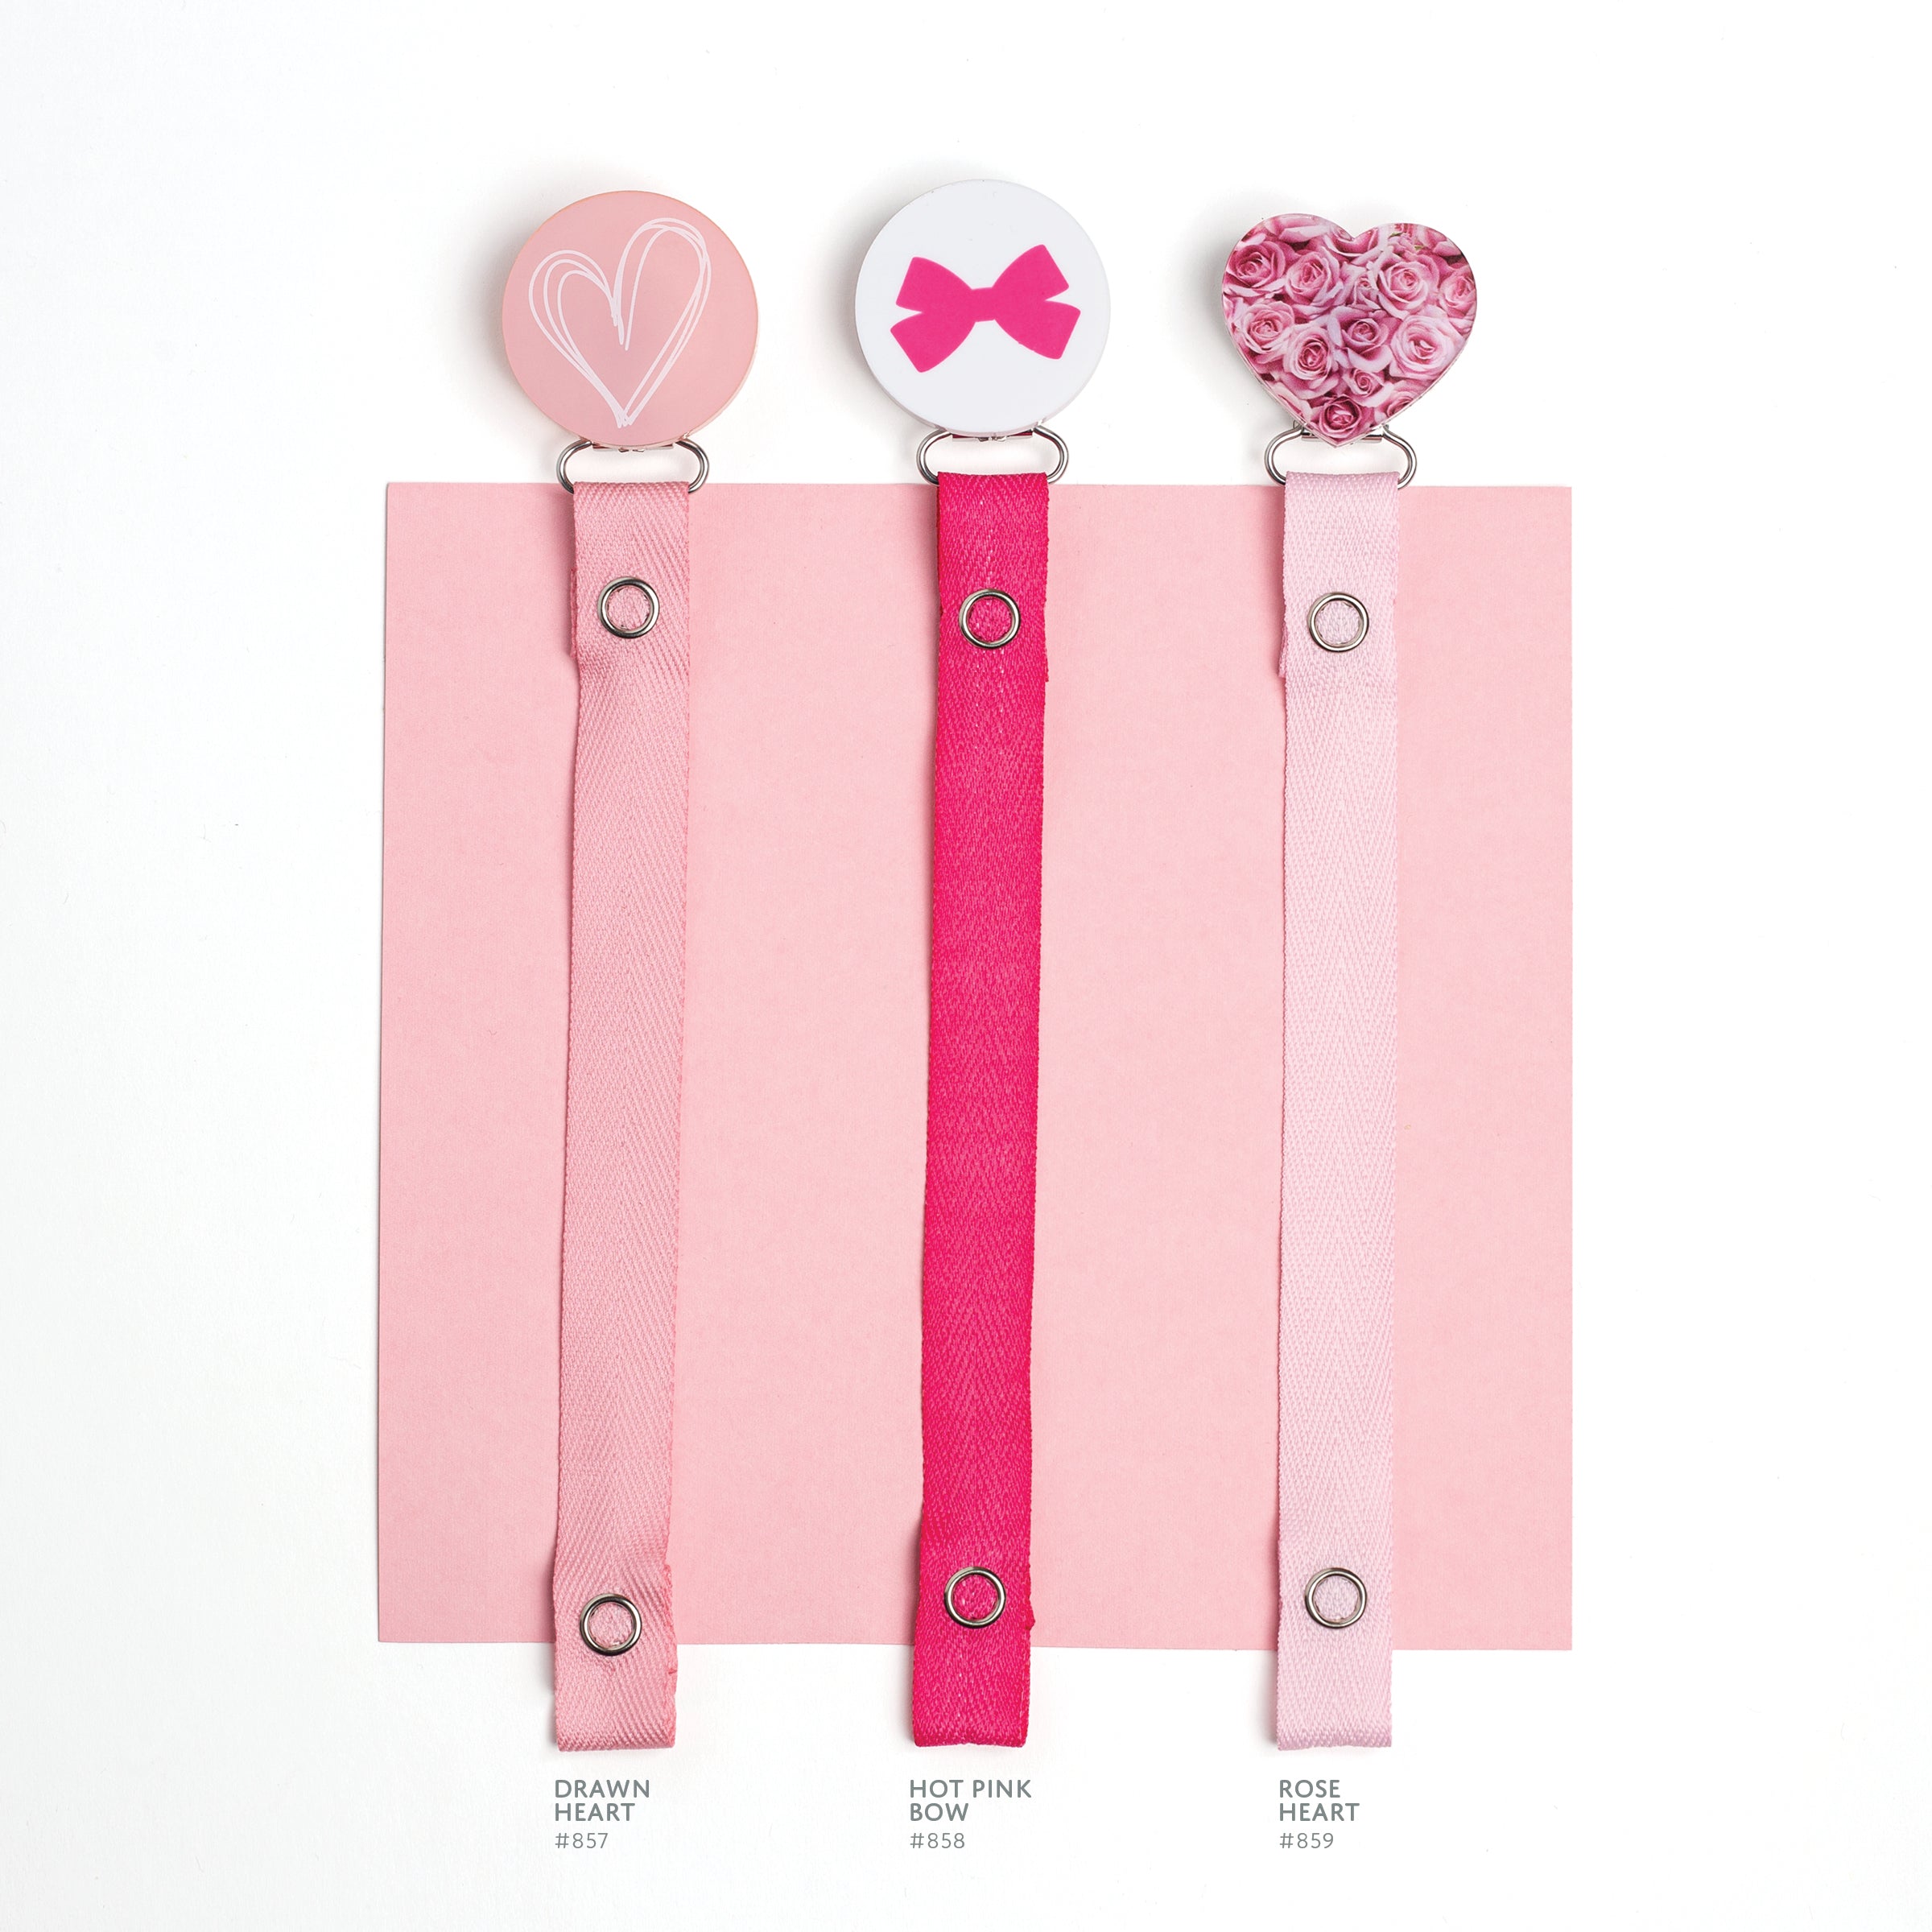 Classy Paci hues of pink roses heart pacifier clip